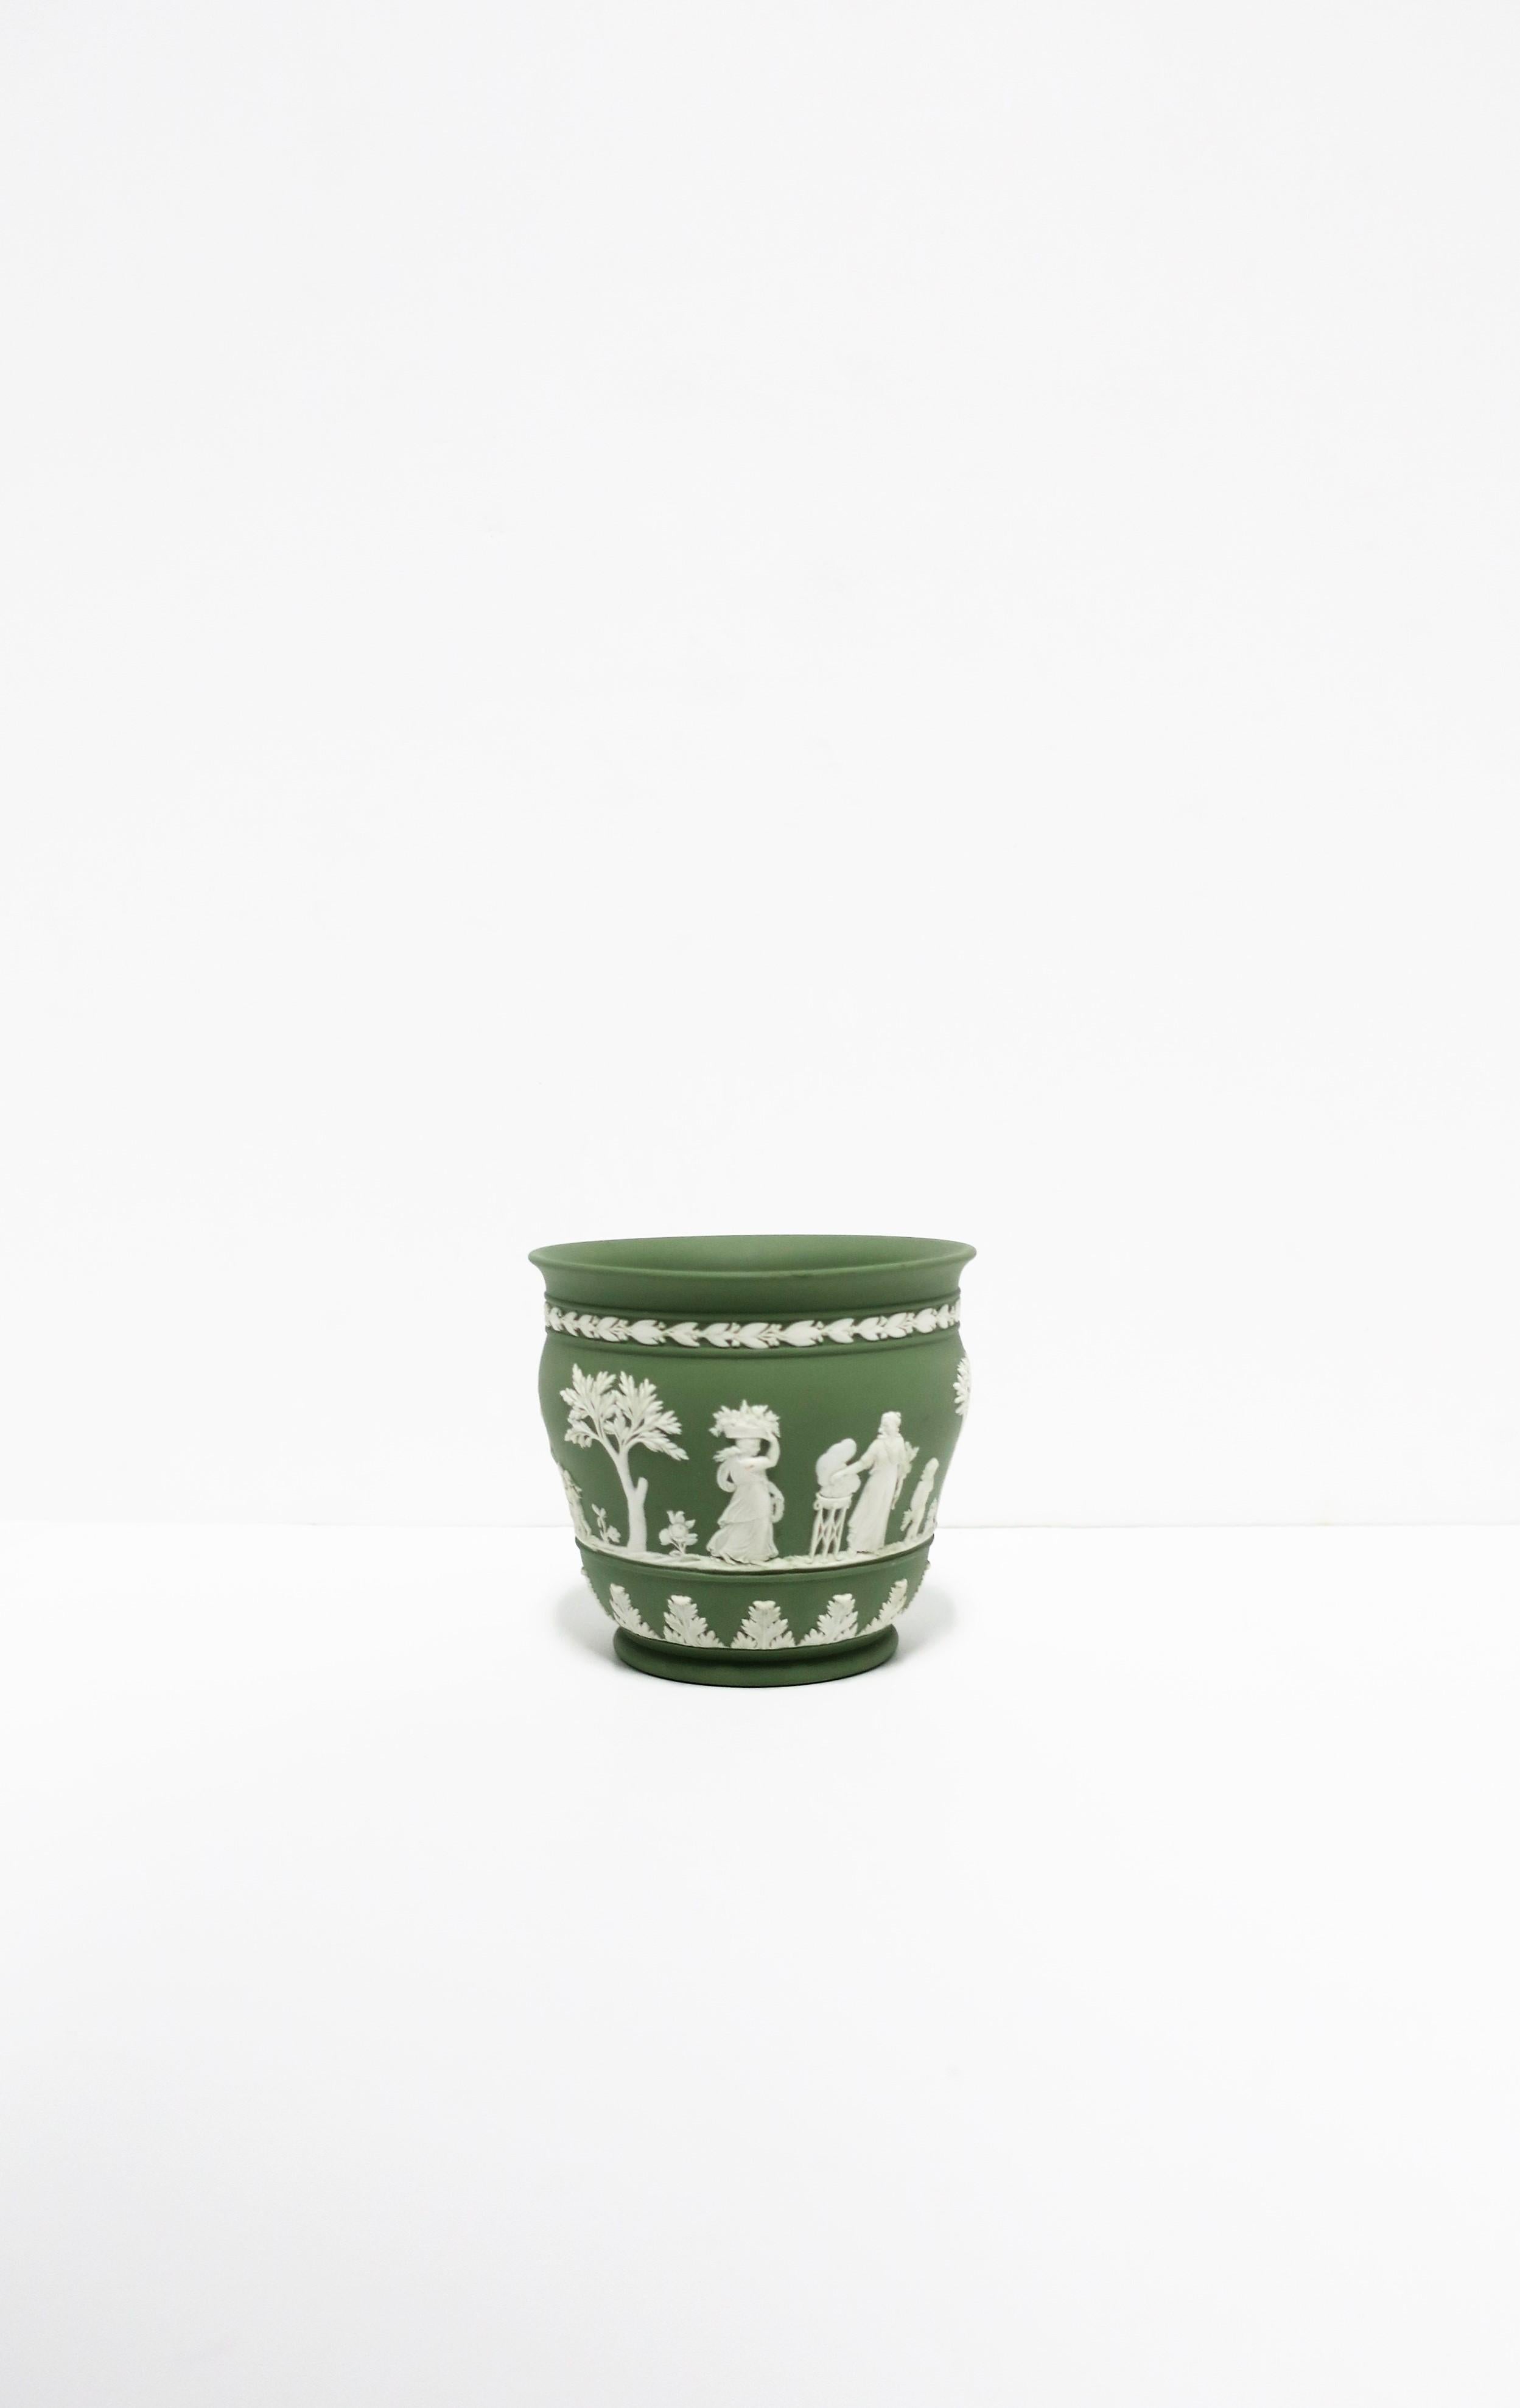 A beautiful English Wedgwood sage green and white matte Jasperware stoneware planter cachepot jardinière (plant pot holder) in the neoclassical design style, circa 20th century, England. Piece is a matte stoneware in a light green with a white